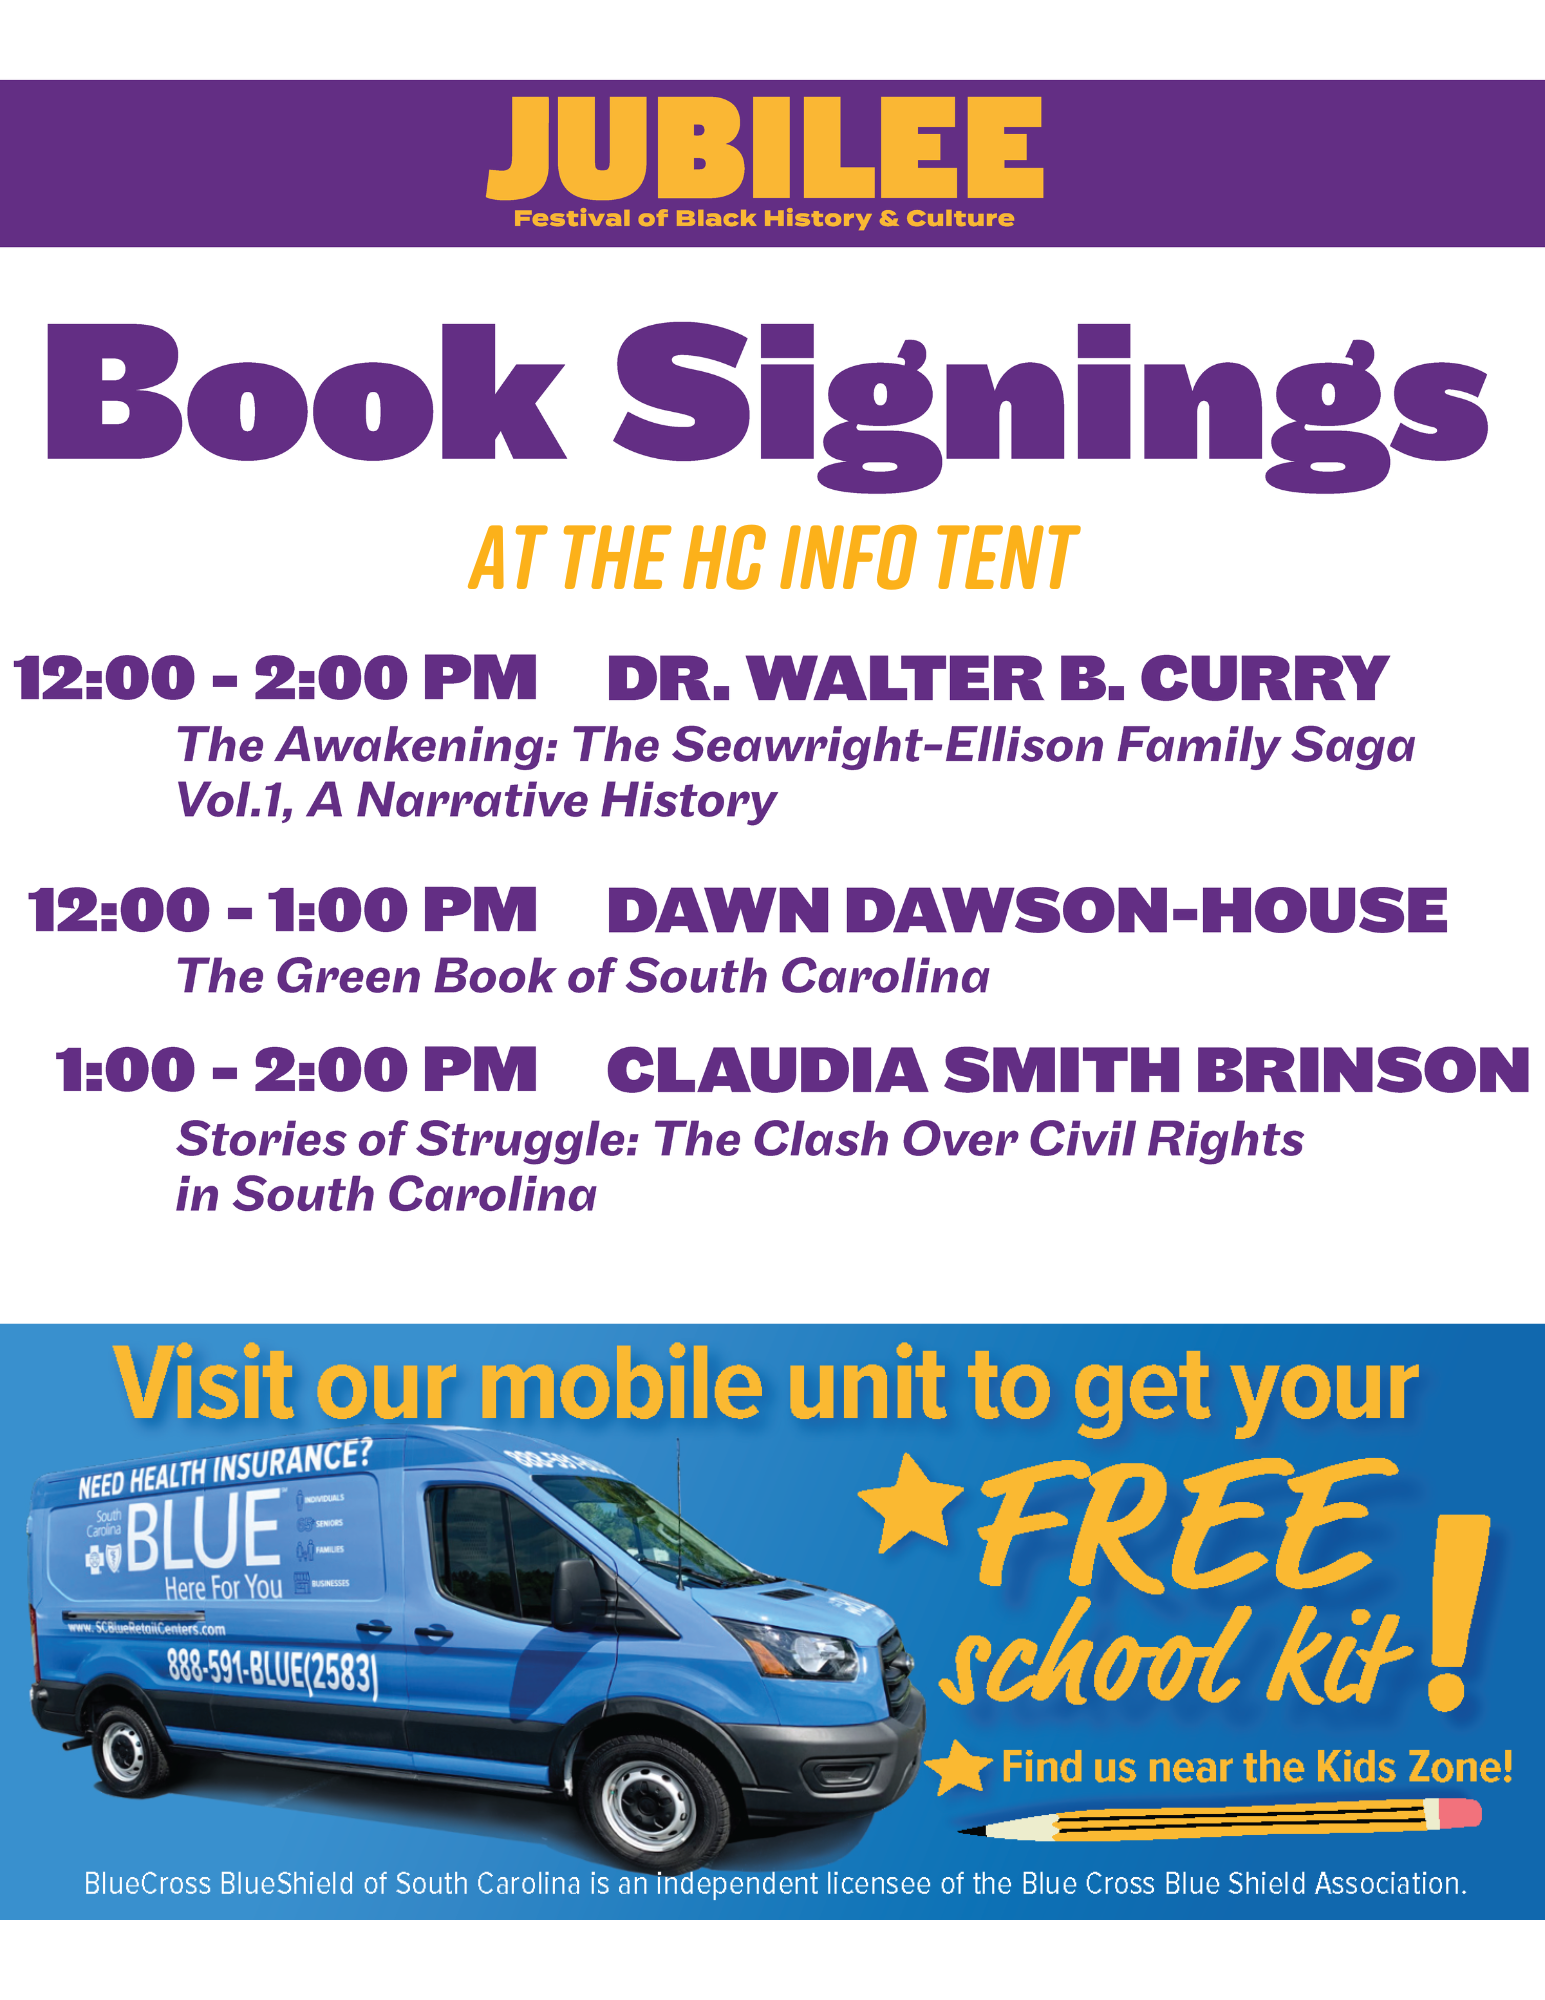 Book signings